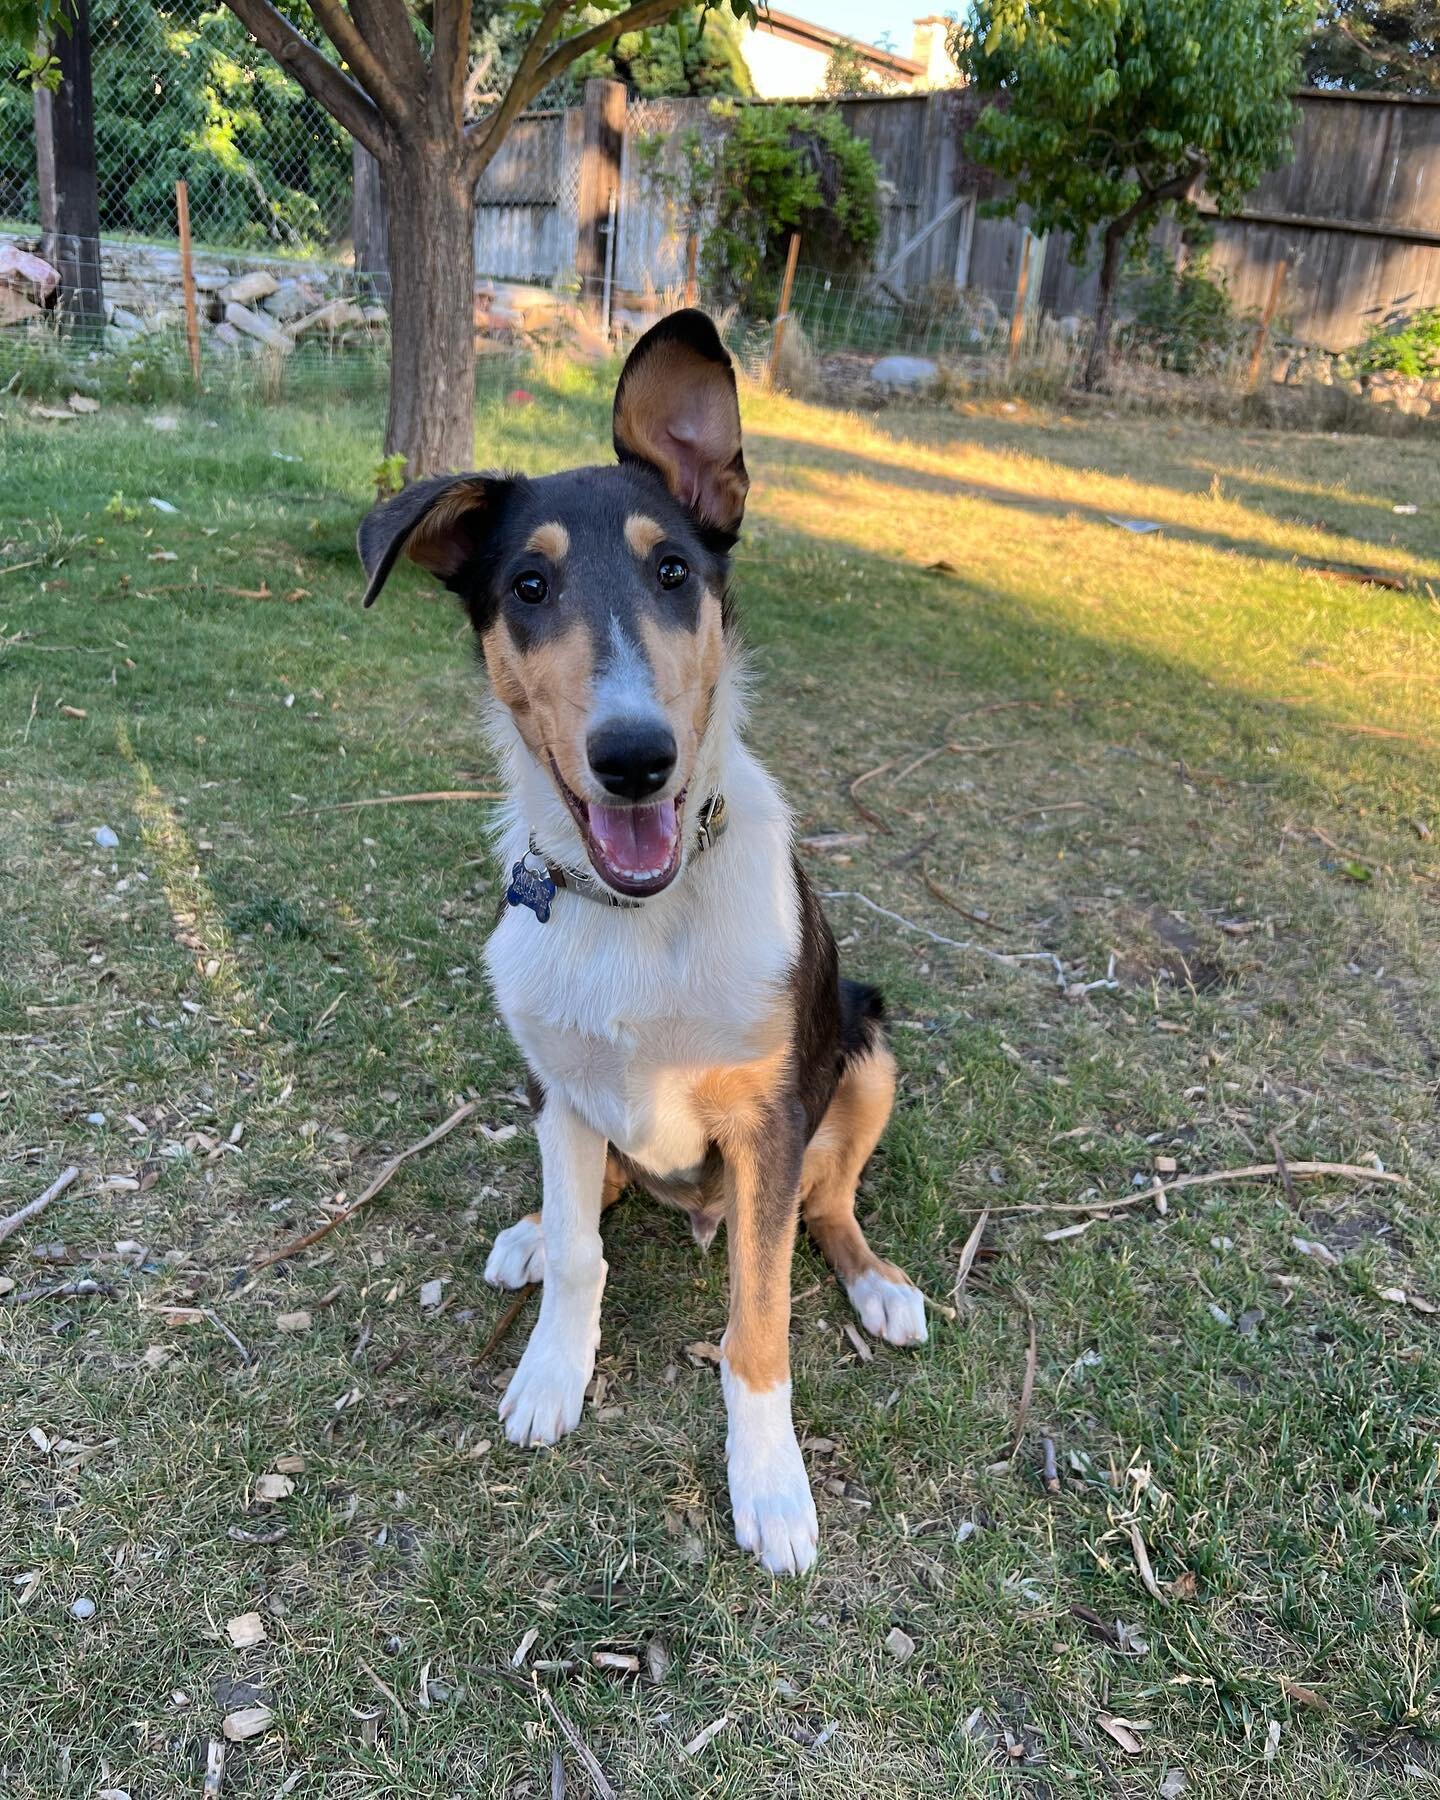 Our Enzo boy is ready to join his forever home! Any chance it could be yours?

Gorgeous Enzo was our pick of the litter both in beauty and personality. He is an absolute *people dog,* and he wants nothing more than to give unending affection to the w